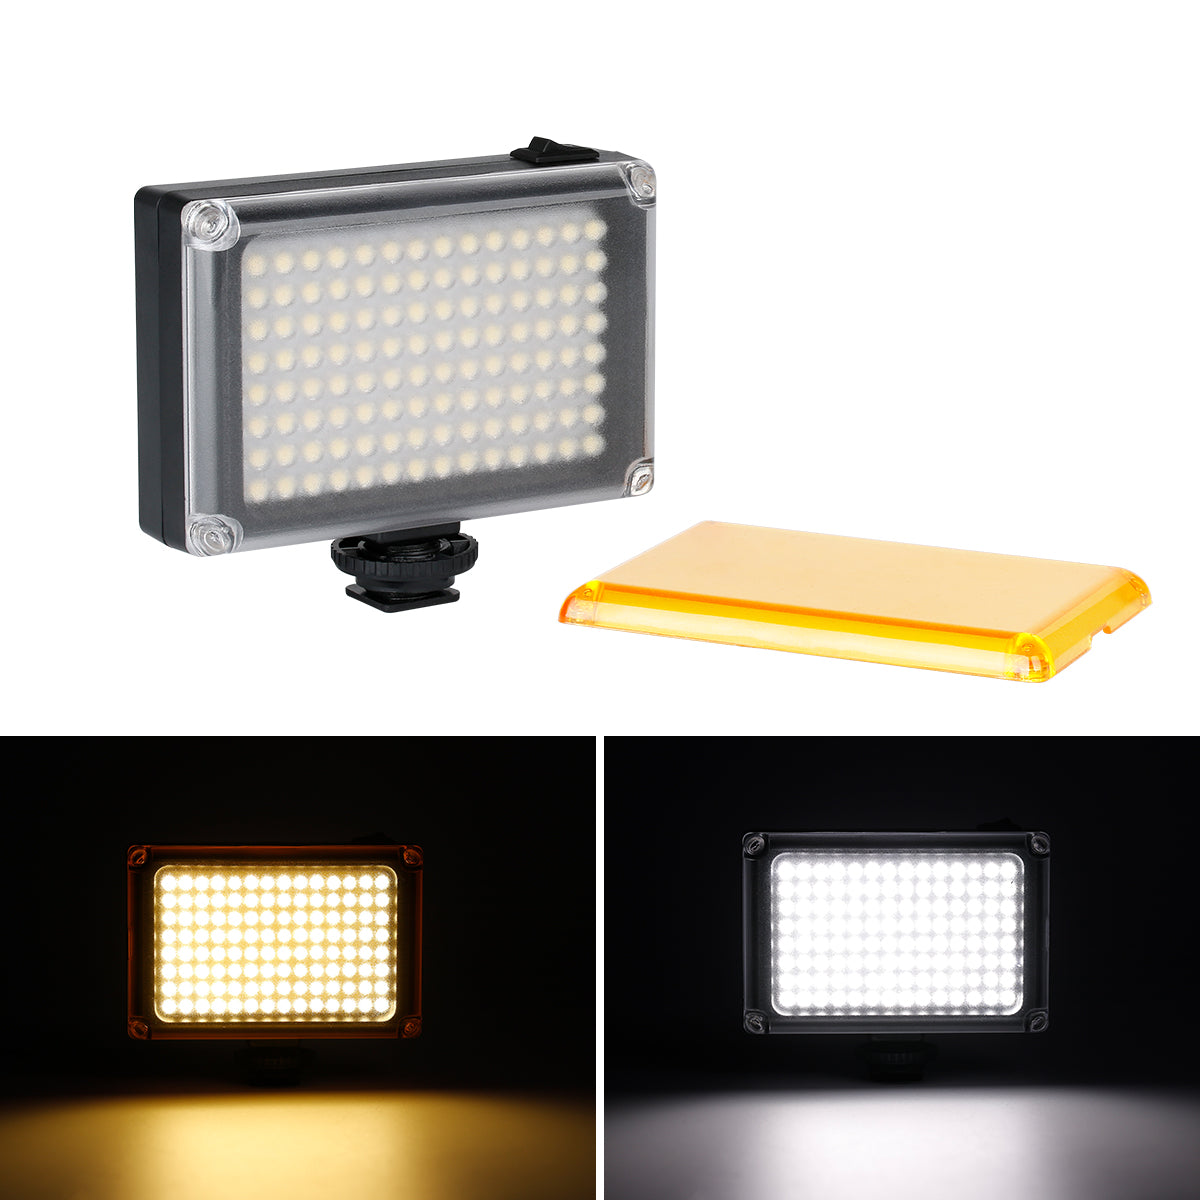 Uniqkart 112 LED Phone Video Light Photographic Lighting for Youtube Live Streaming Dimmable Bi-color Temperature LED Lamp